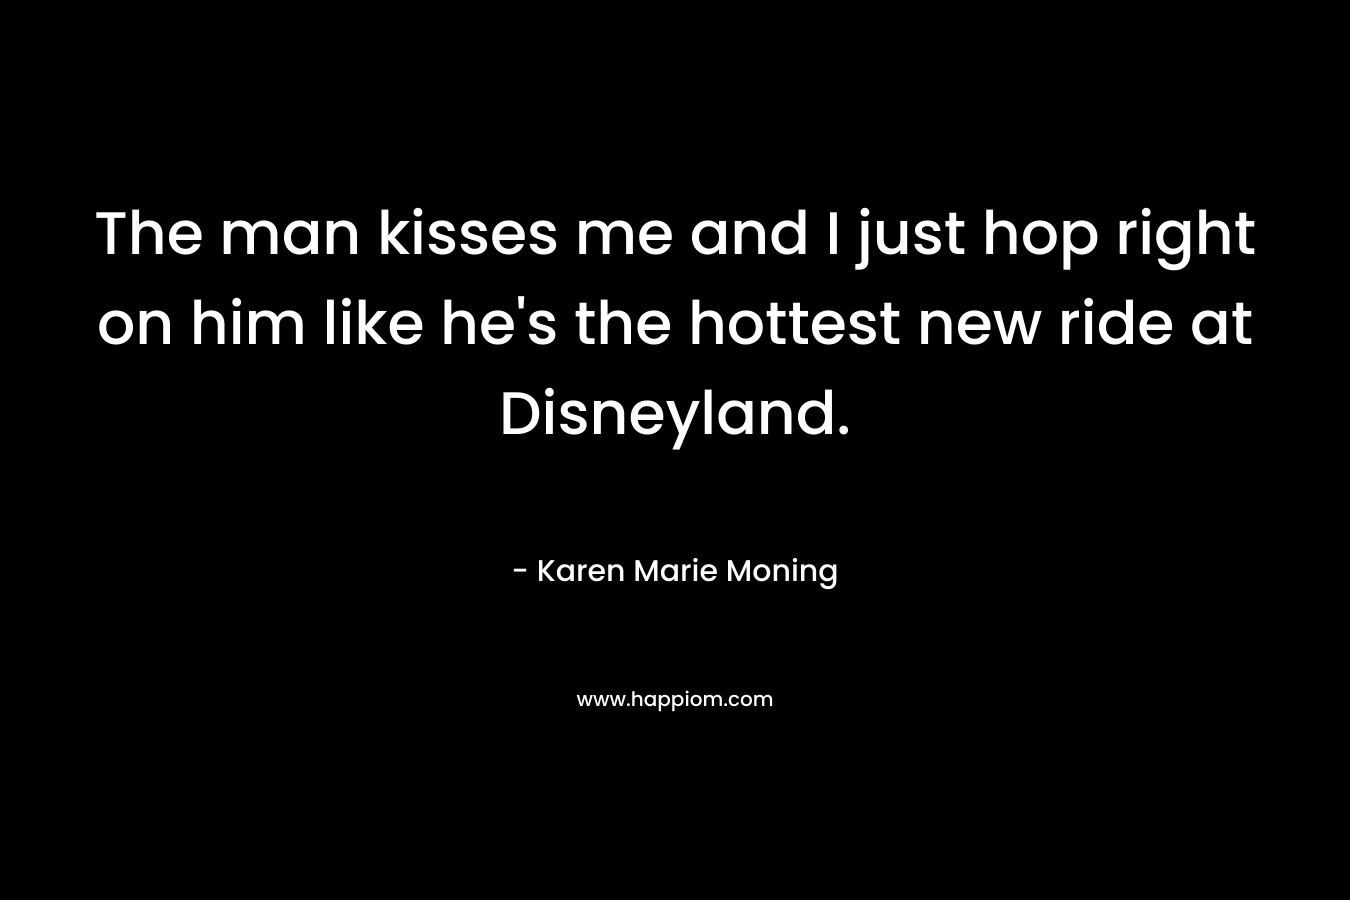 The man kisses me and I just hop right on him like he’s the hottest new ride at Disneyland. – Karen Marie Moning